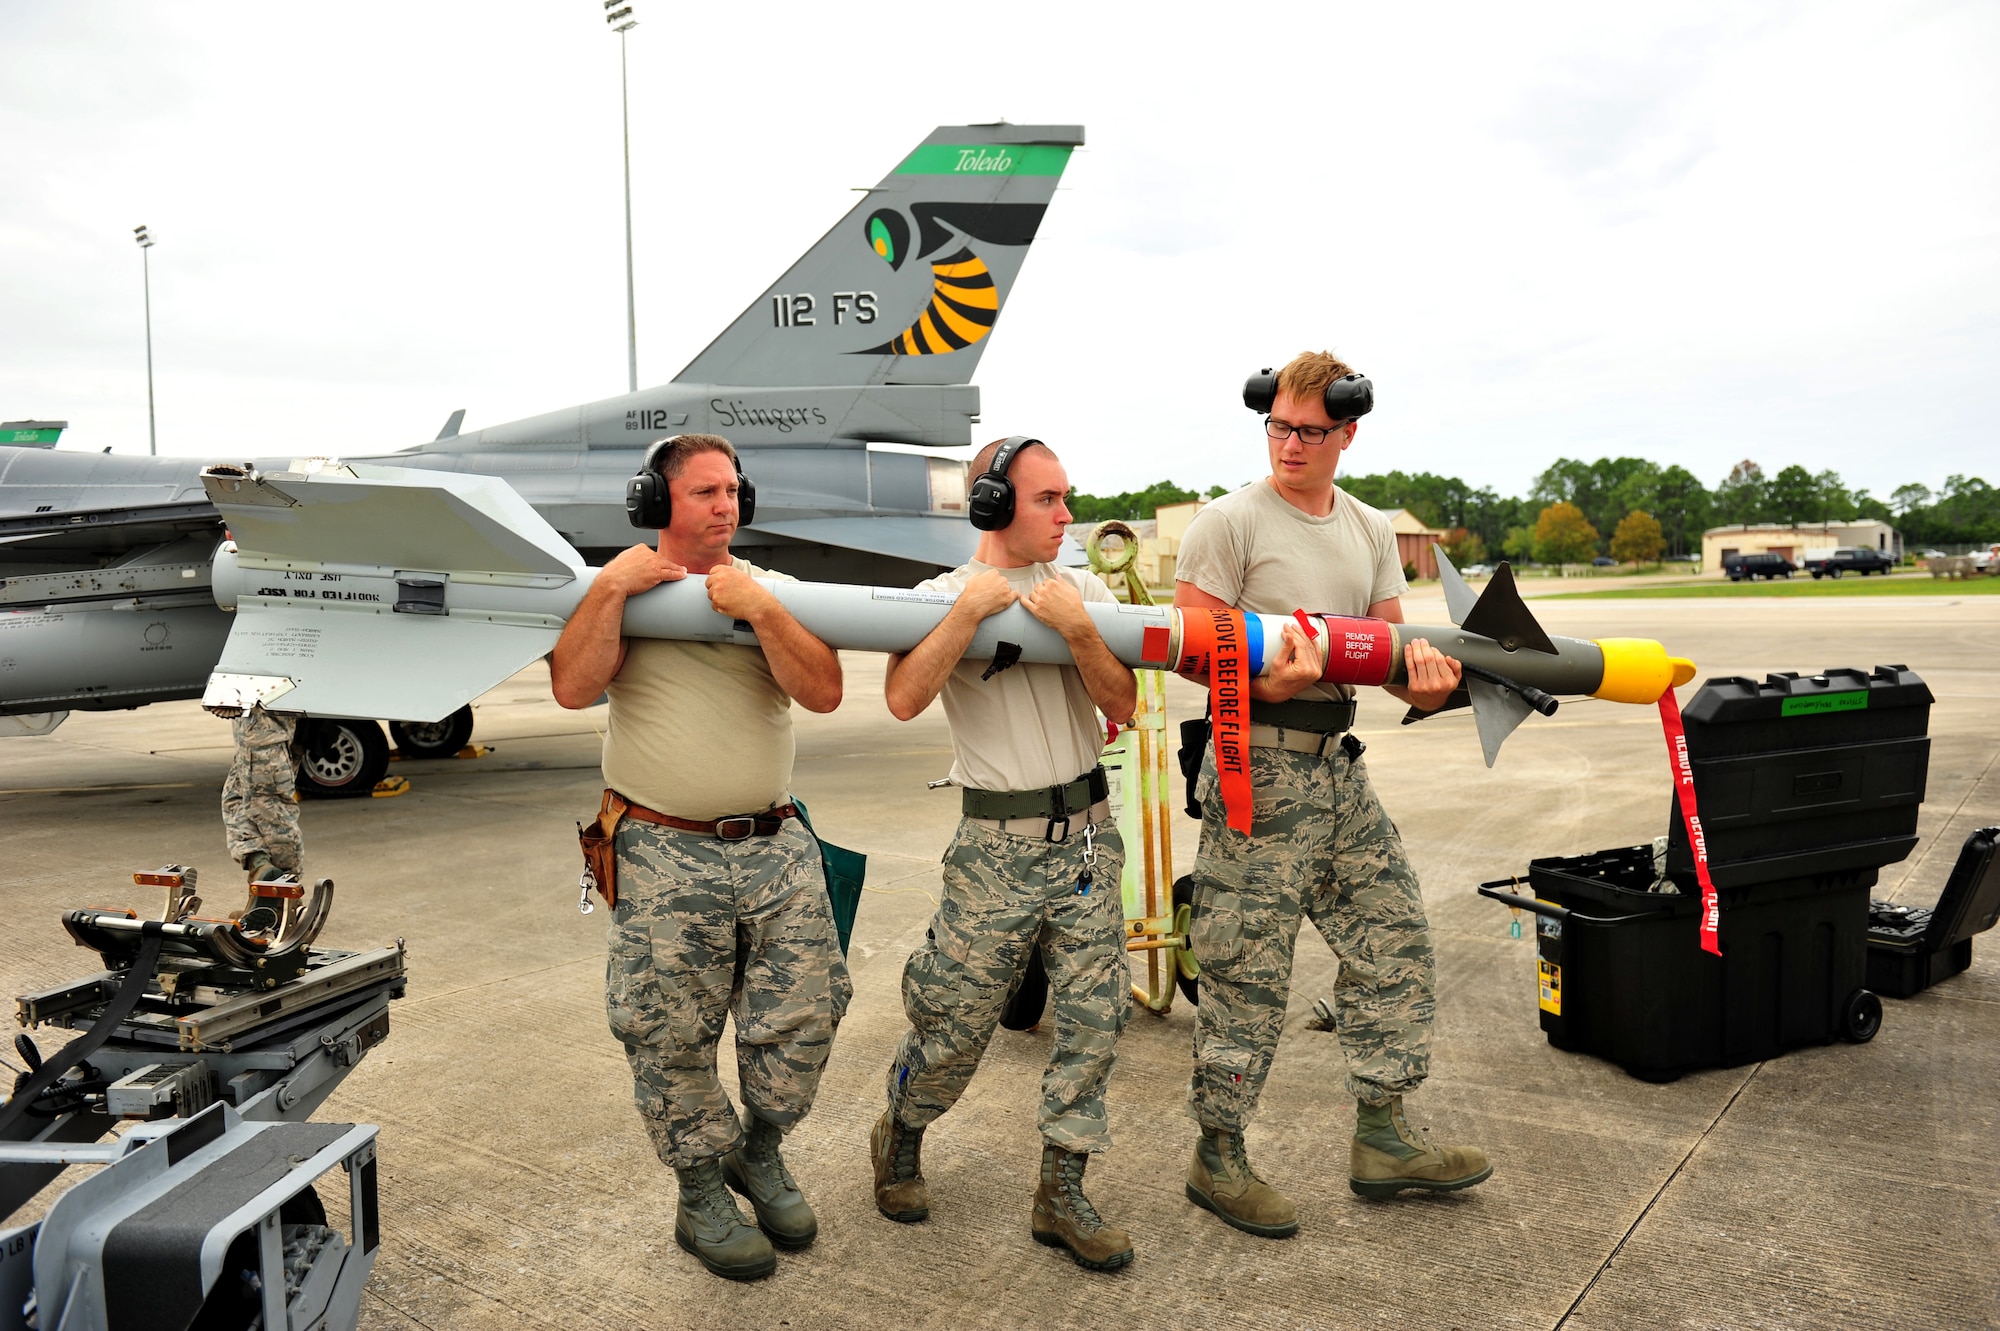 Weapons loaders from the 180th Fighter Wing, Ohio Air National Guard, transport an AIM-9 to be loaded on an F-16 Fighting Falcon Sept. 15, at Tyndall Air Force Base, Fla. About 120 Airmen from the 180th FW traveled to Tyndall to participate in the Combat Archer exercise, a 53rd Wing weapons system evaluation program designed to test the effectiveness of Airmen and air-to-air weapon system capability of combat aircraft.  (U.S. Air Force photo/Senior Master Sgt. Beth Holliker)